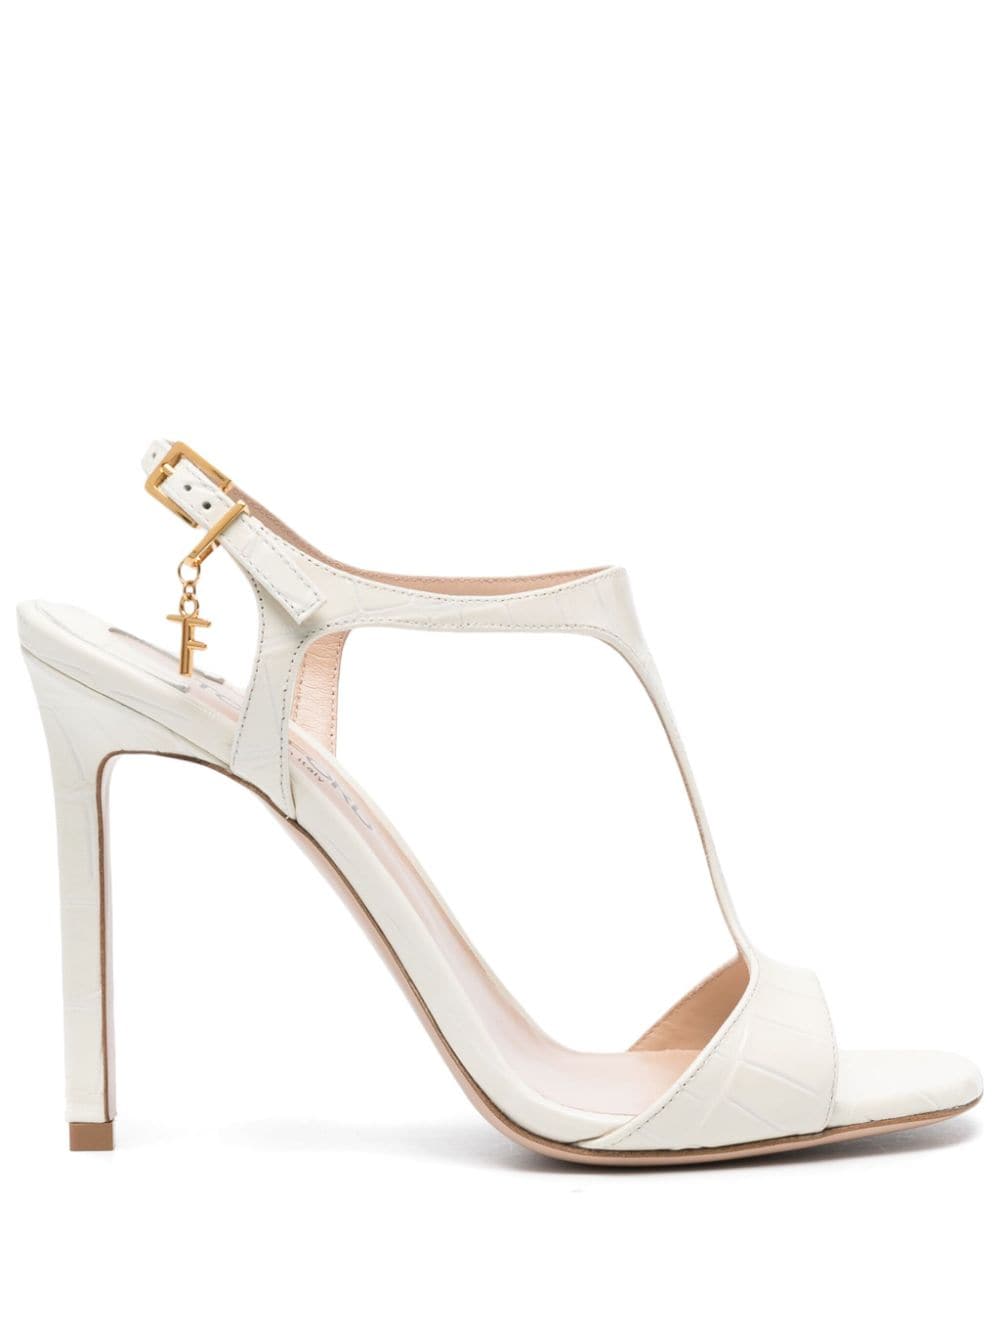 TOM FORD Angelina 95mm leather sandals - White von TOM FORD